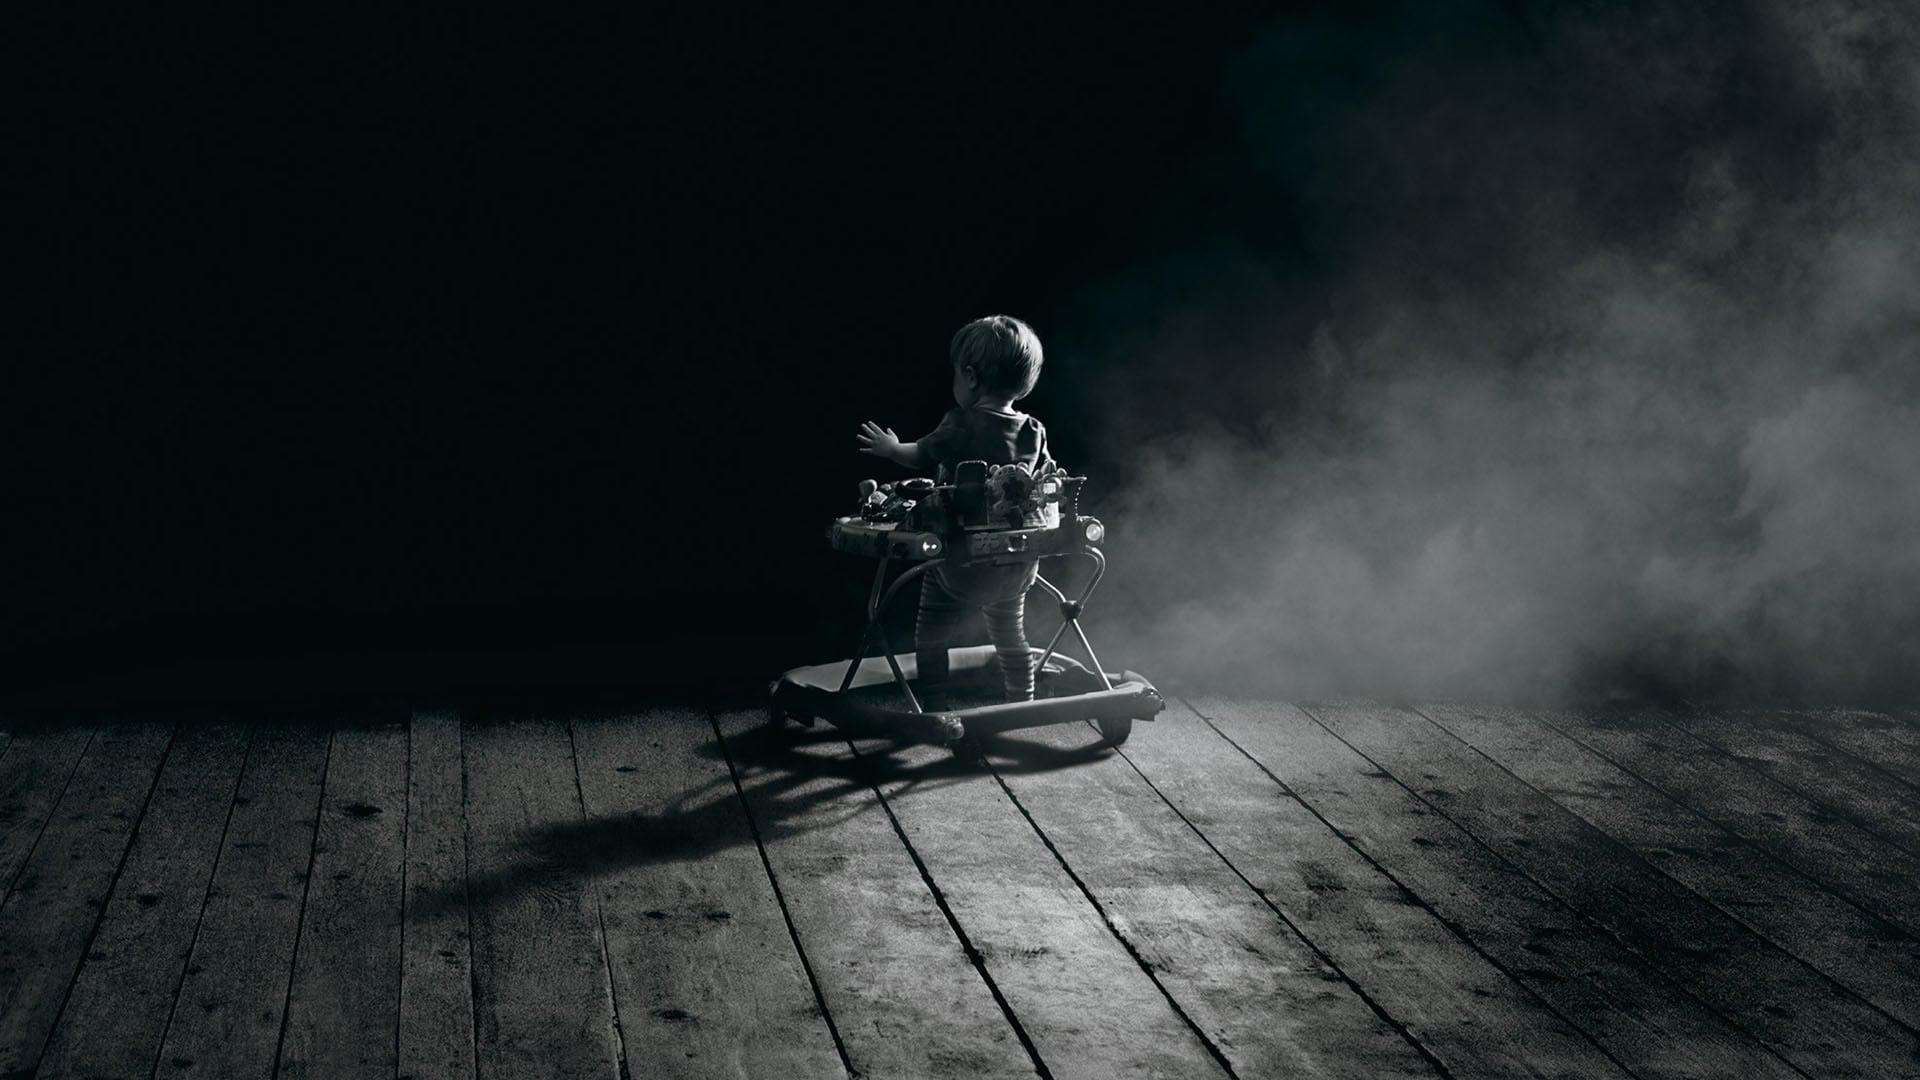 Backdrop Image for Insidious: Chapter 2